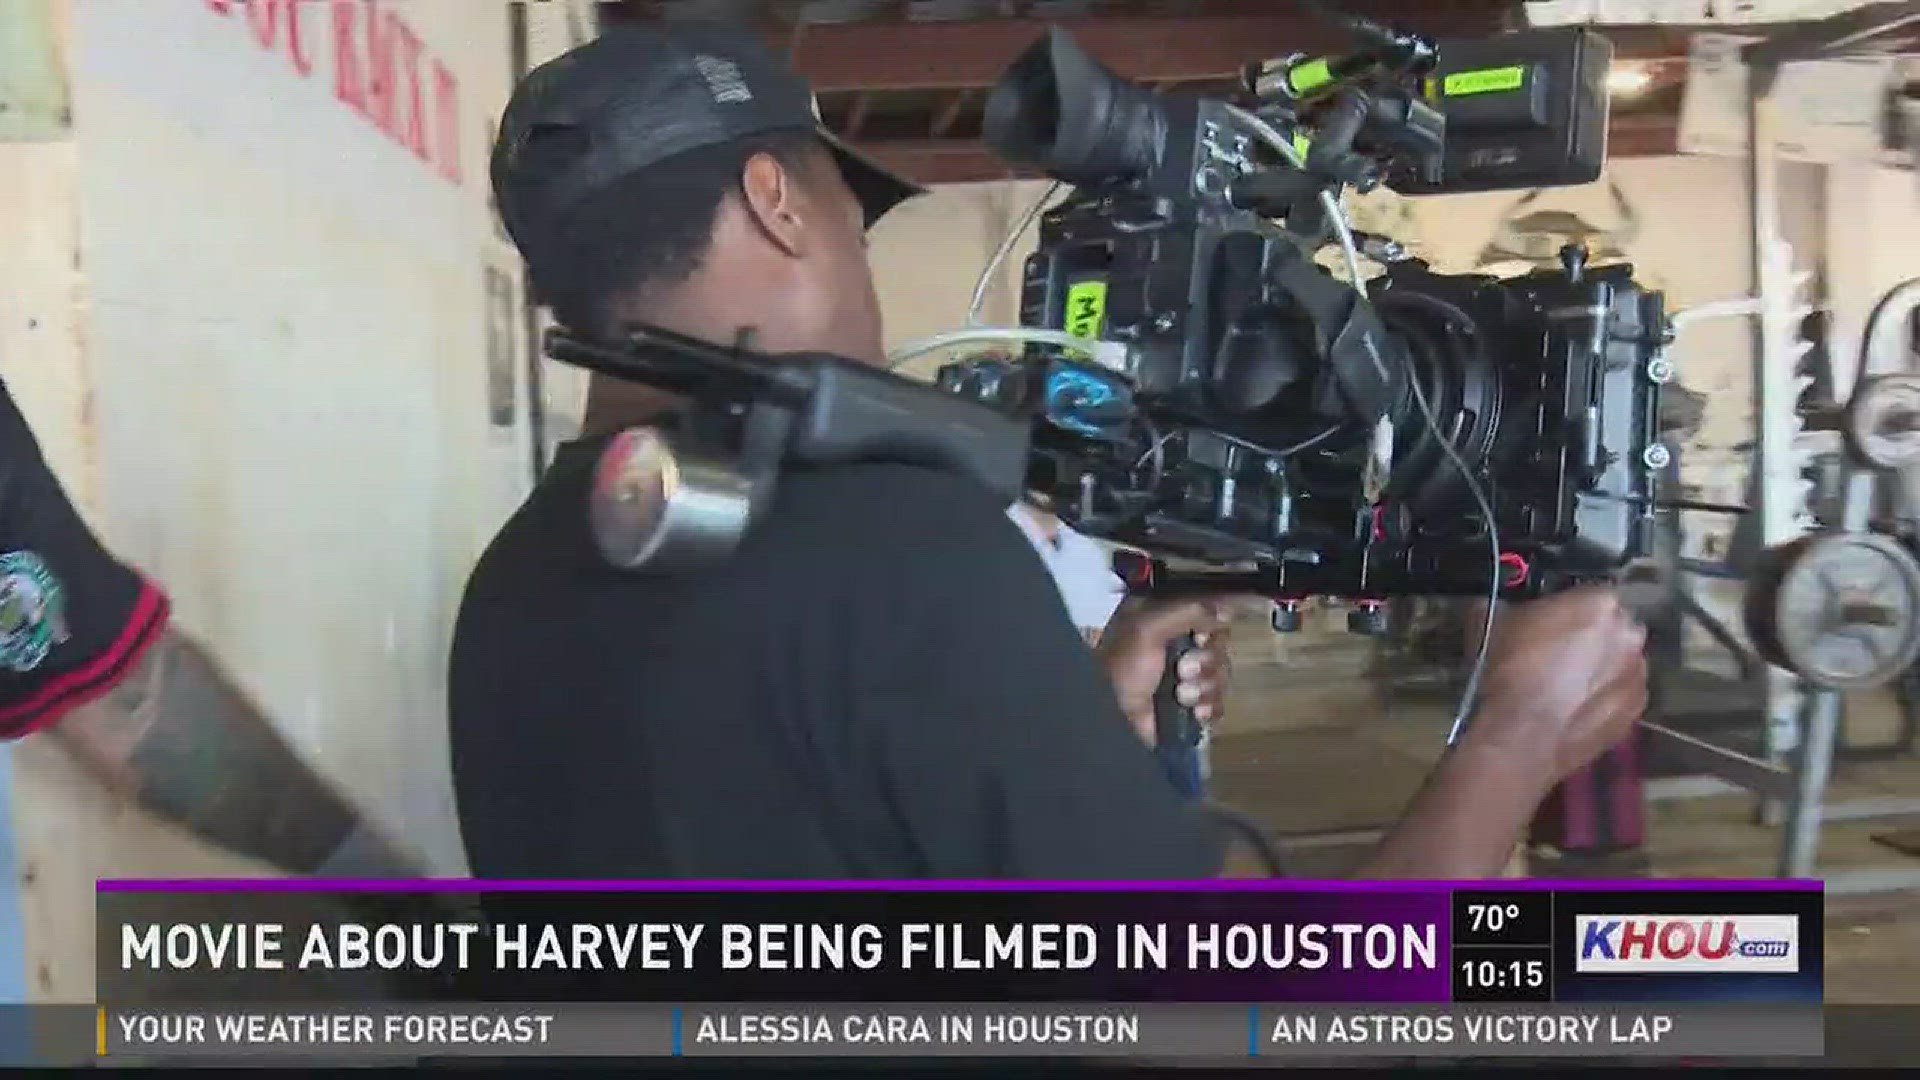 Shooting for the movie "Harvey" is now underway in Houston, and most scenes will feature average Houstonians who survived the deadly storm.